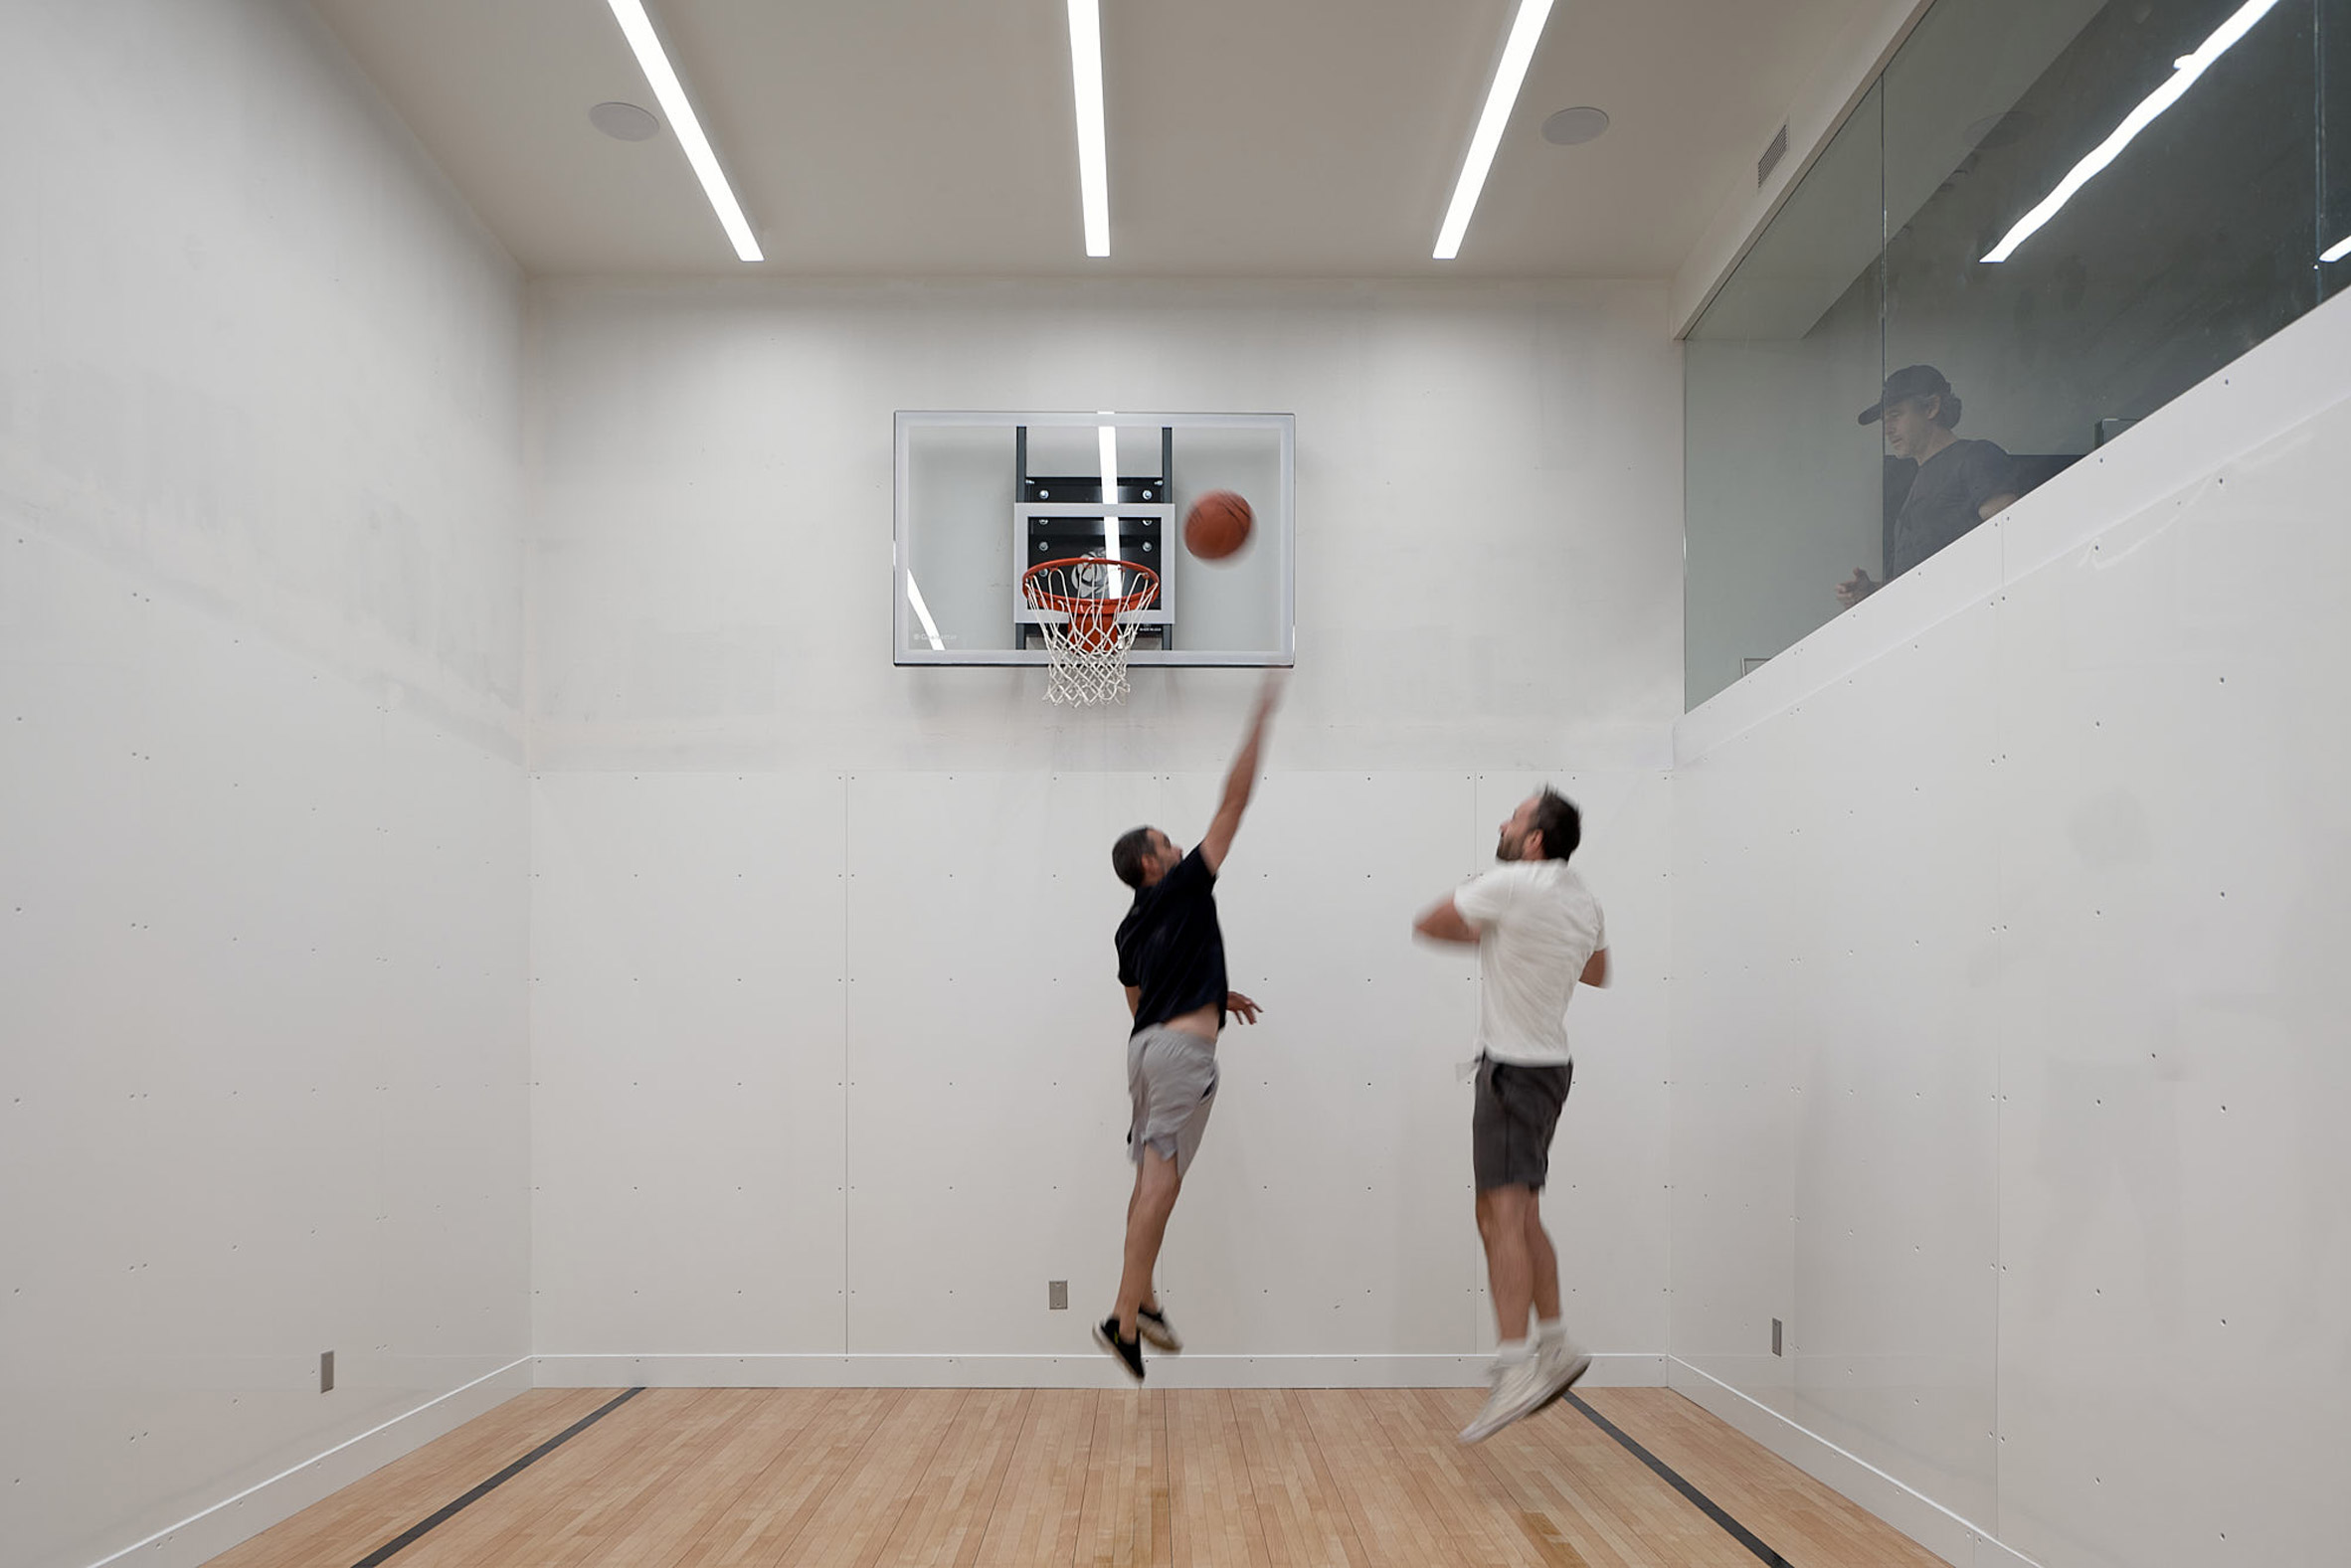  Drew Mandel Architects developed a basketball court in the basement